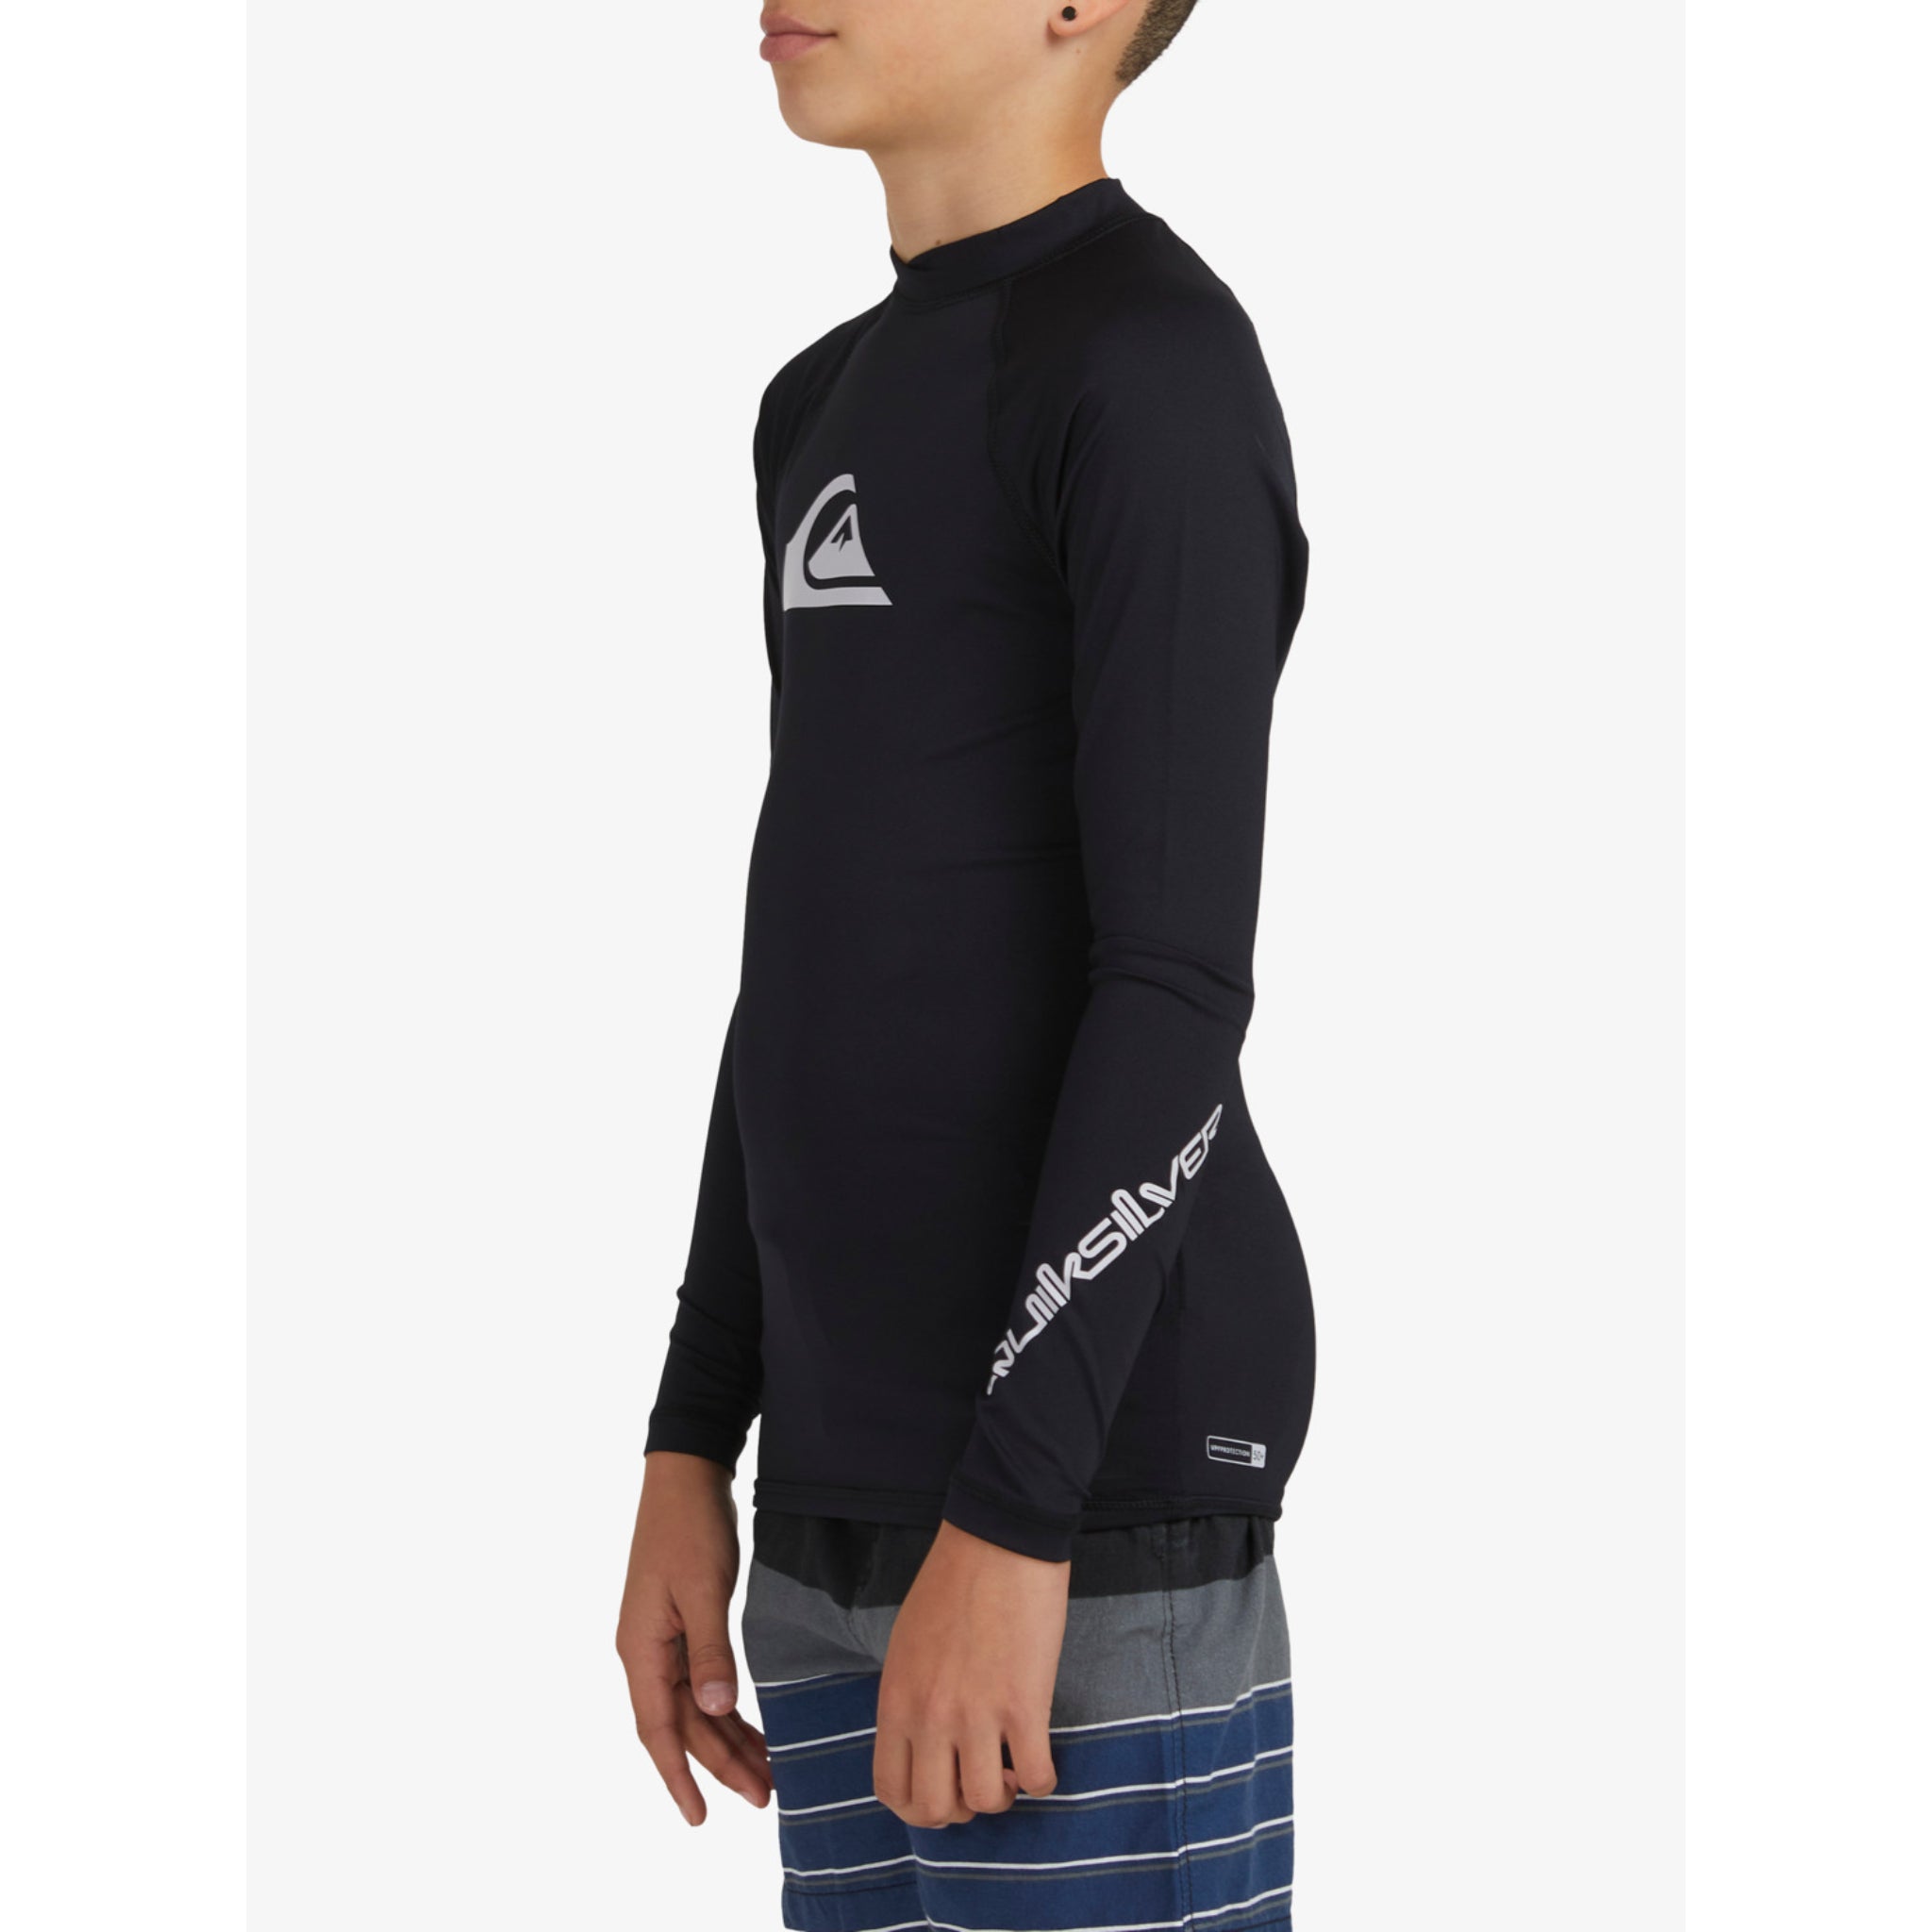 Quiksilver Youth All Time LS Rashie